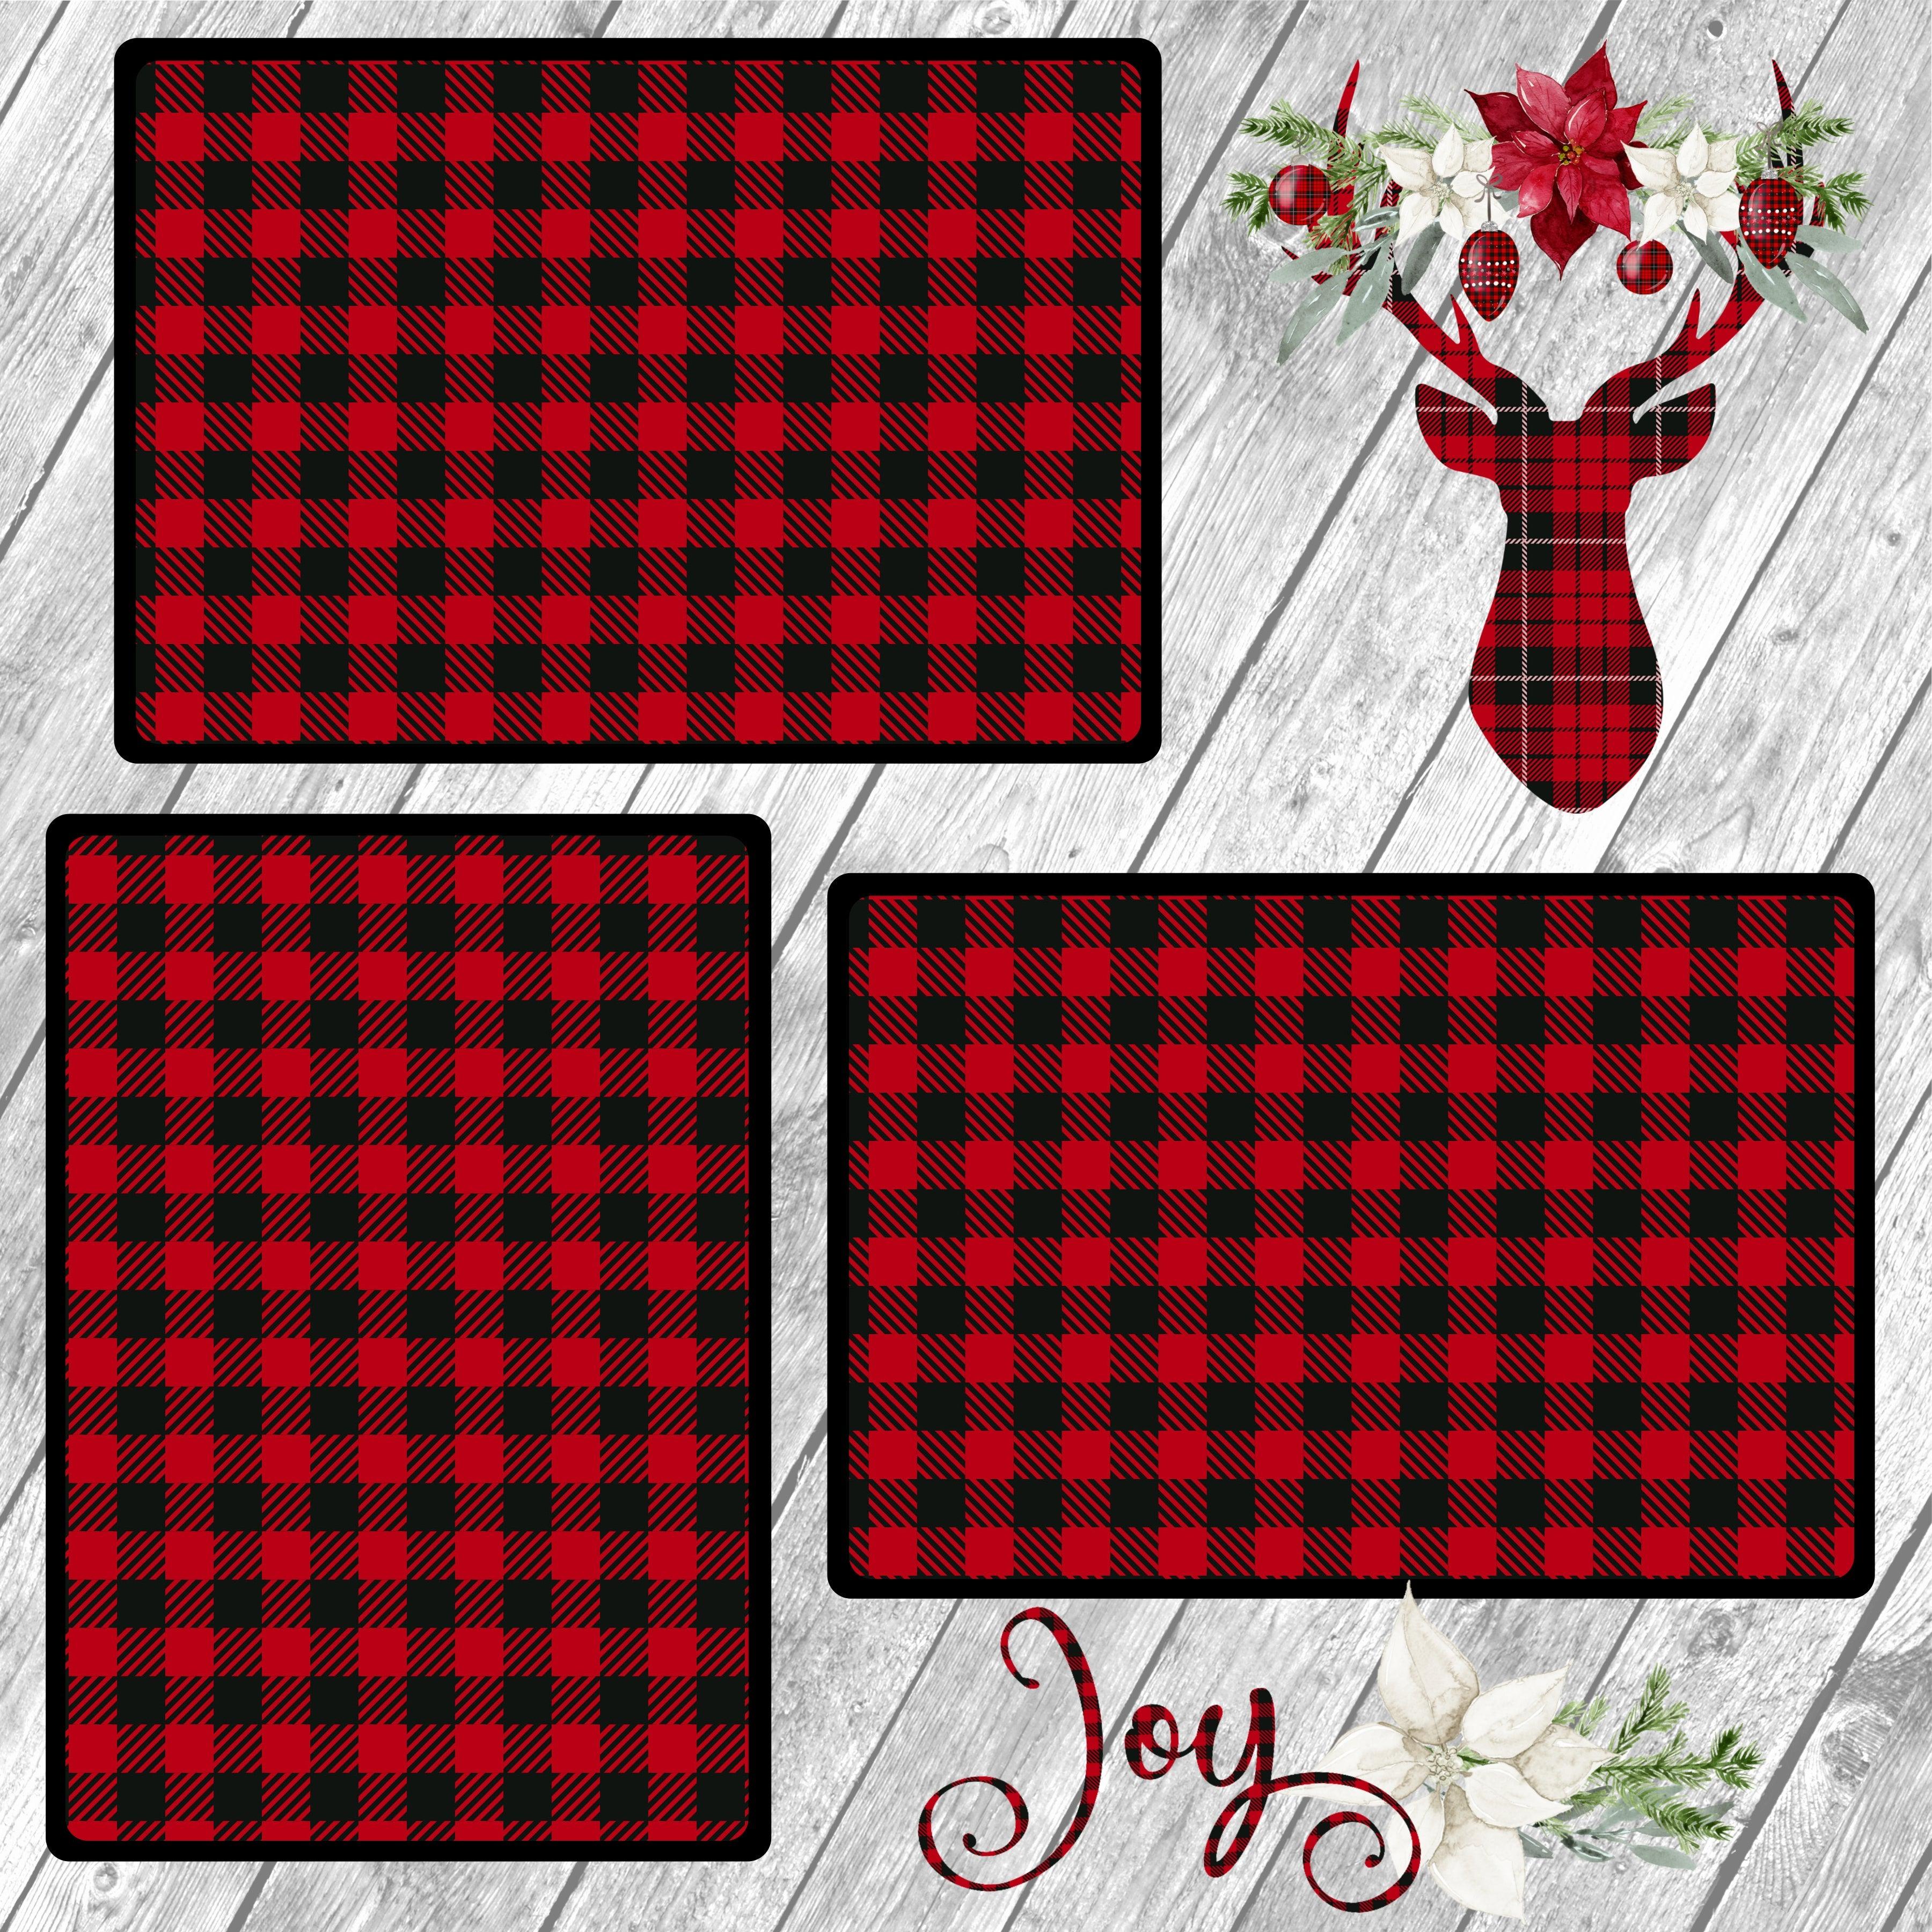 Buffalo Plaid Christmas (2) - 12 x 12 Premade, Printed Scrapbook Pages by SSC Designs - Scrapbook Supply Companies